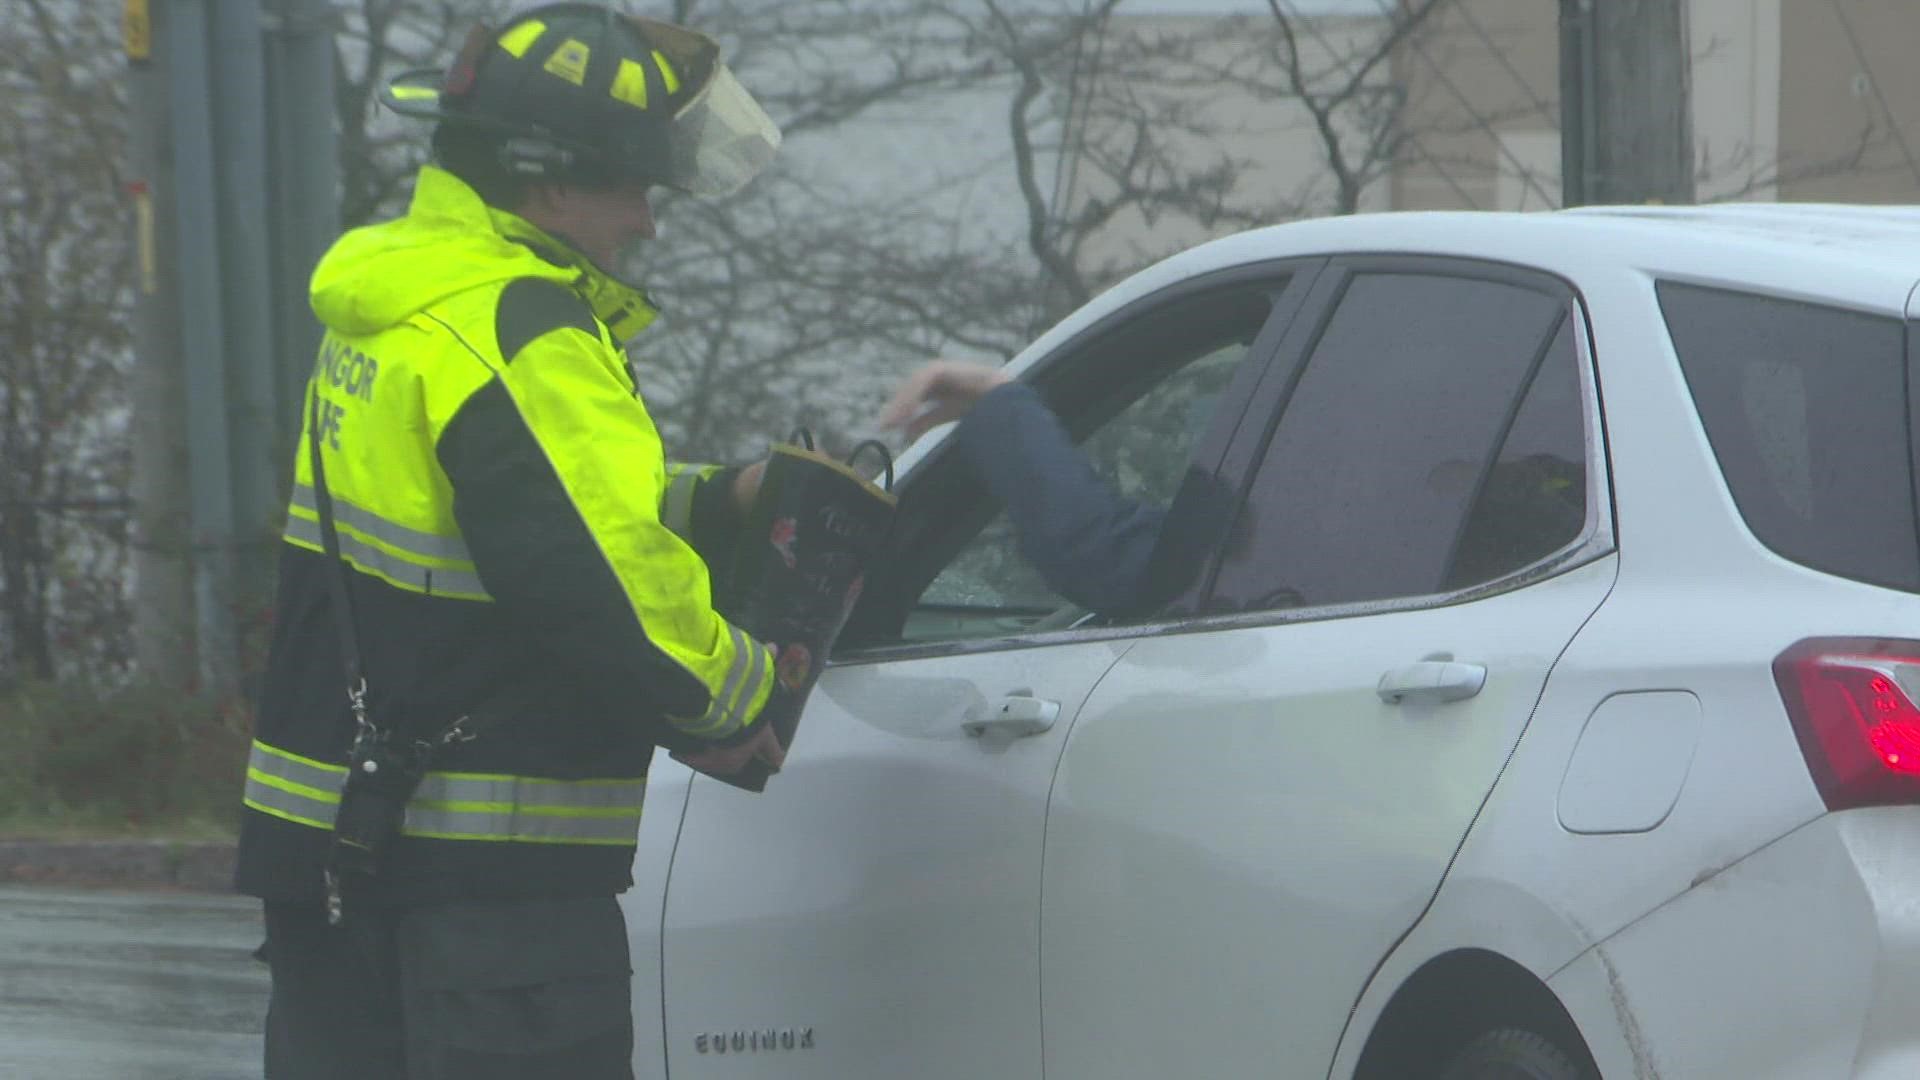 With boots in hand, Bangor firefighters used them to collect donations on Hogan Road in Bangor. Each donation goes toward fighting neural muscular diseases.